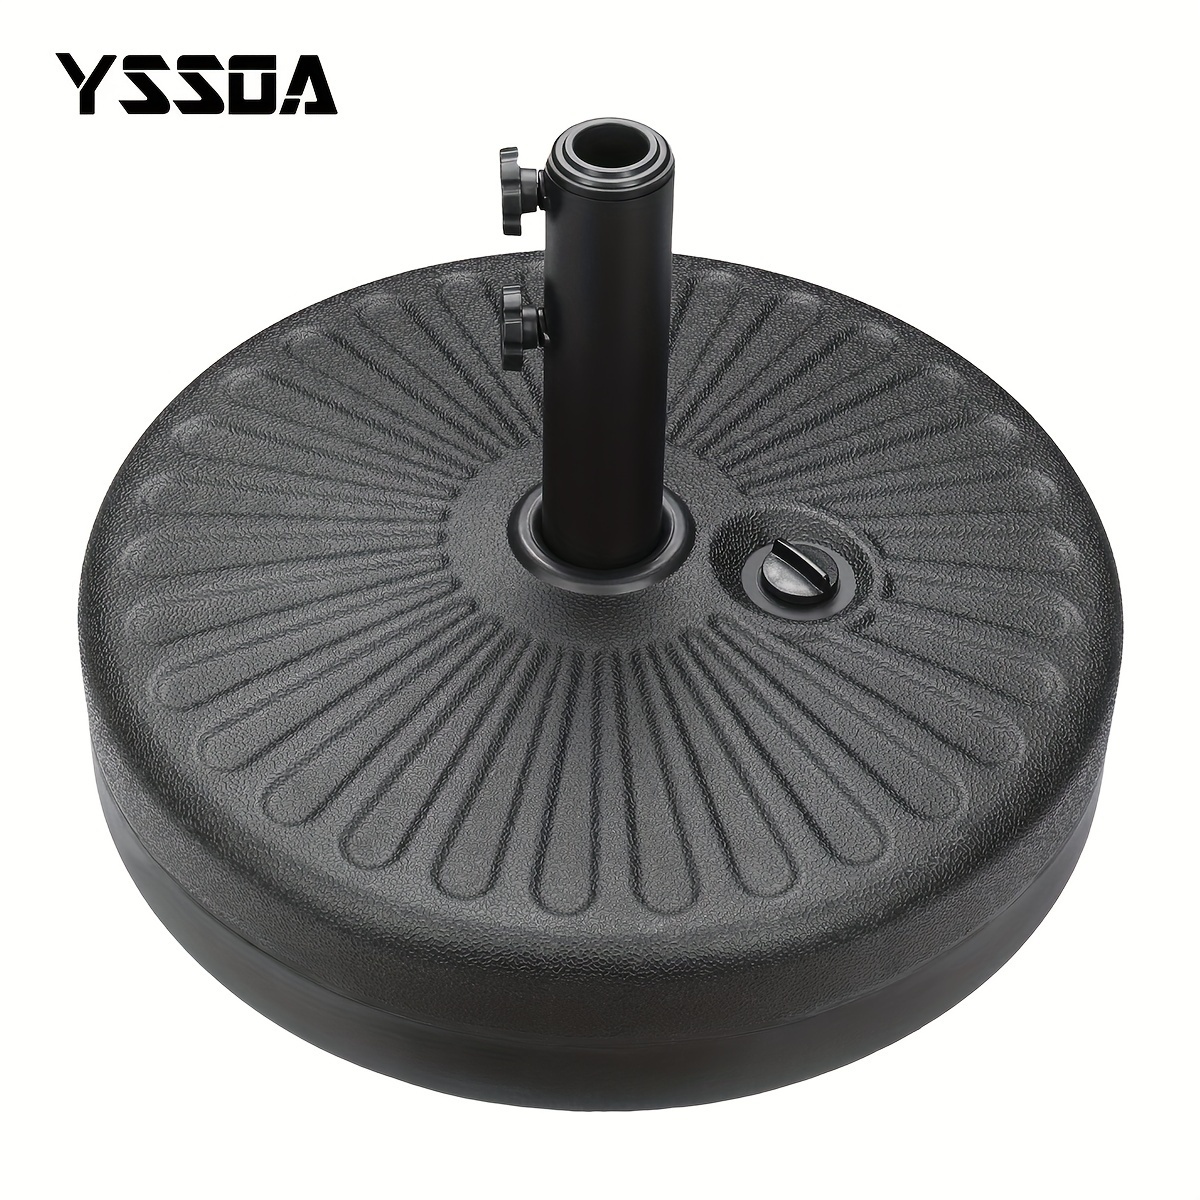 

Yssoa 20" Heavy Duty Patio Market Umbrella Base Stand With Steel Holder Water Filled For Outdoor, Lawn, Garden, Round